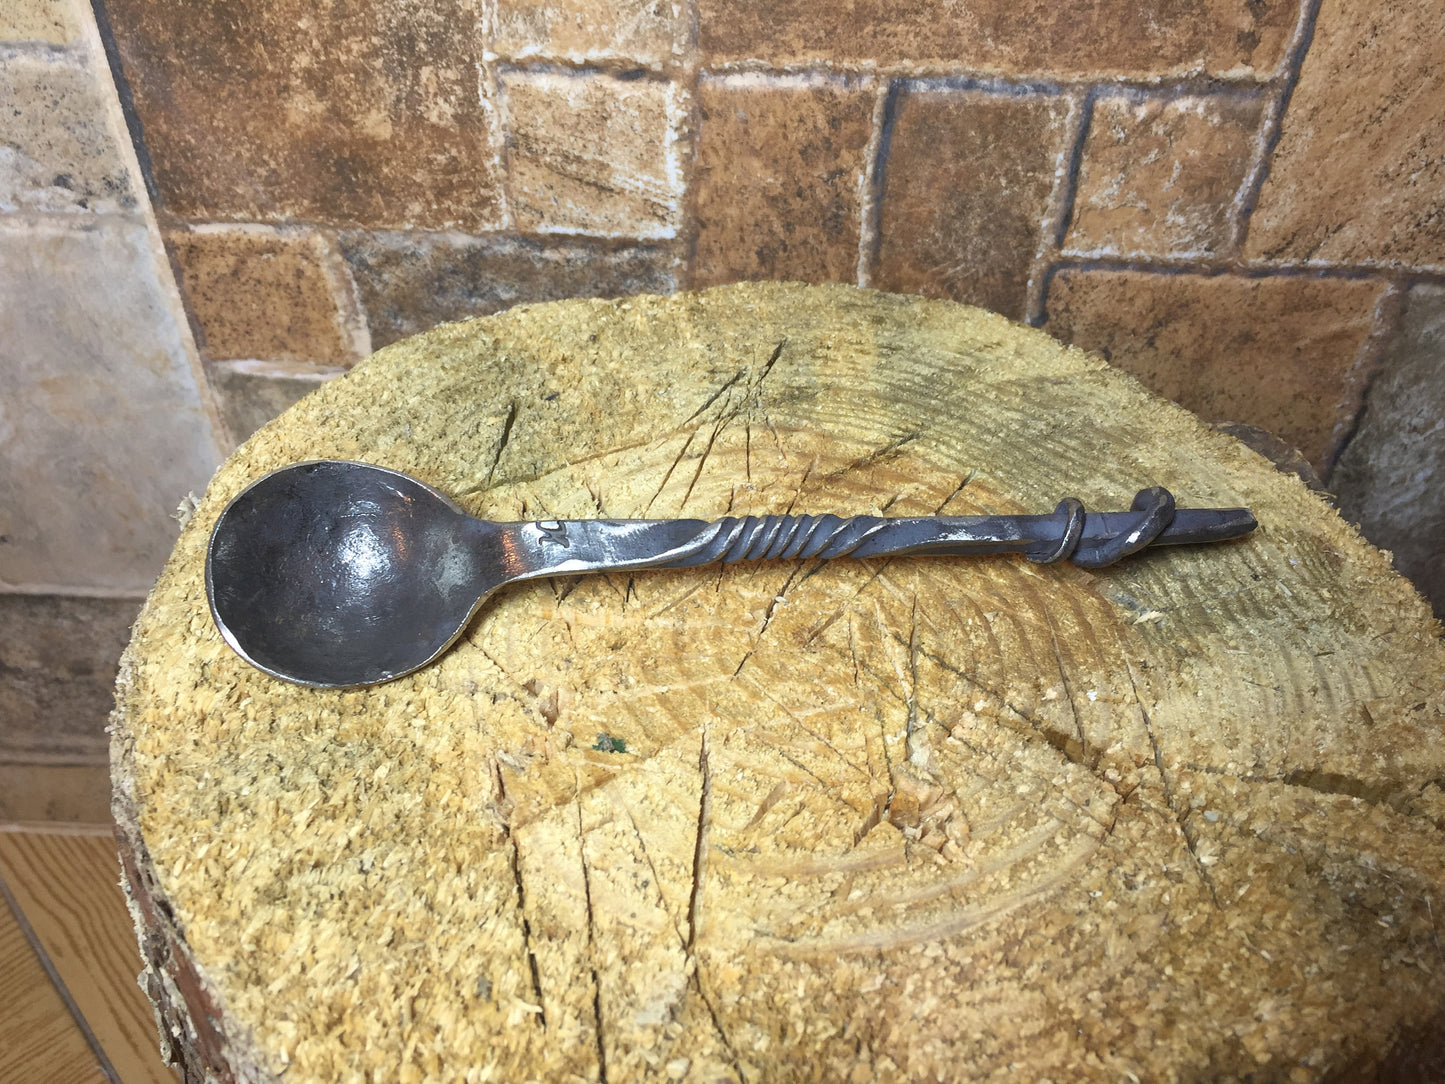 Viking spoon, medieval cutlery, hand forged spoon, rustic spoon, medieval spoon,middle ages spoon,BBQ gifts,dining appliances,forged cutlery